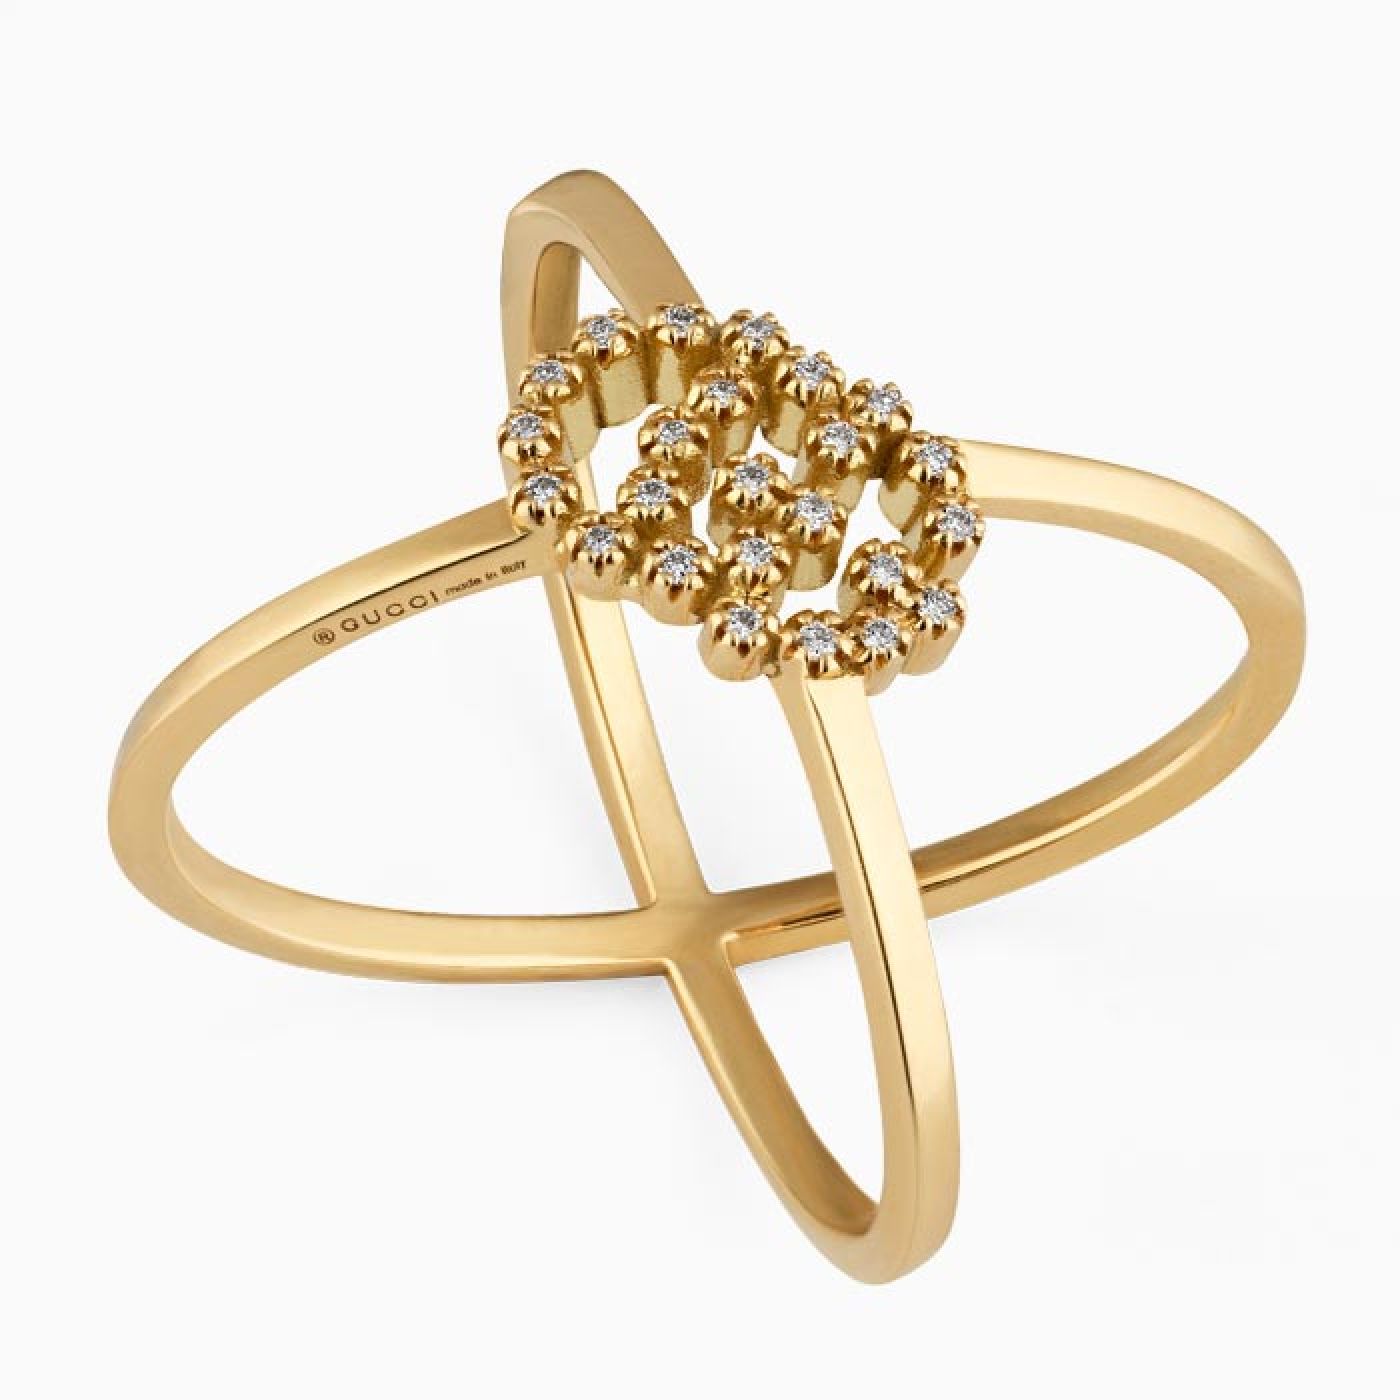 Gucci ring in yellow gold with diamonds